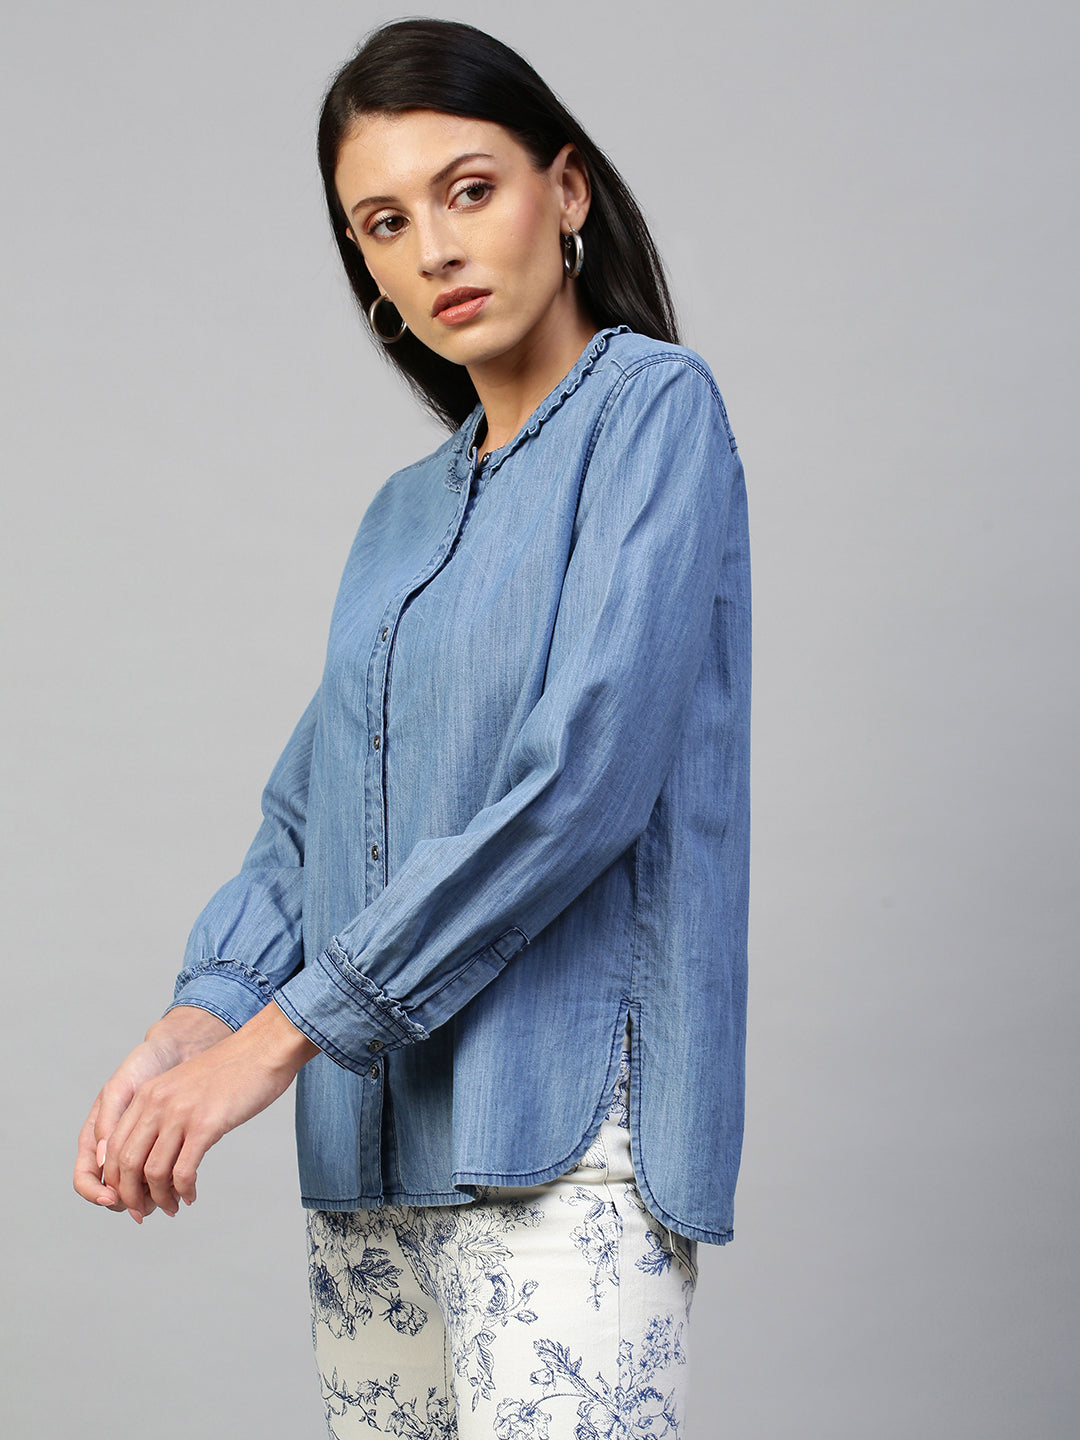 Shop for Shirts | Tops & T-Shirts | Womens | online at Freemans